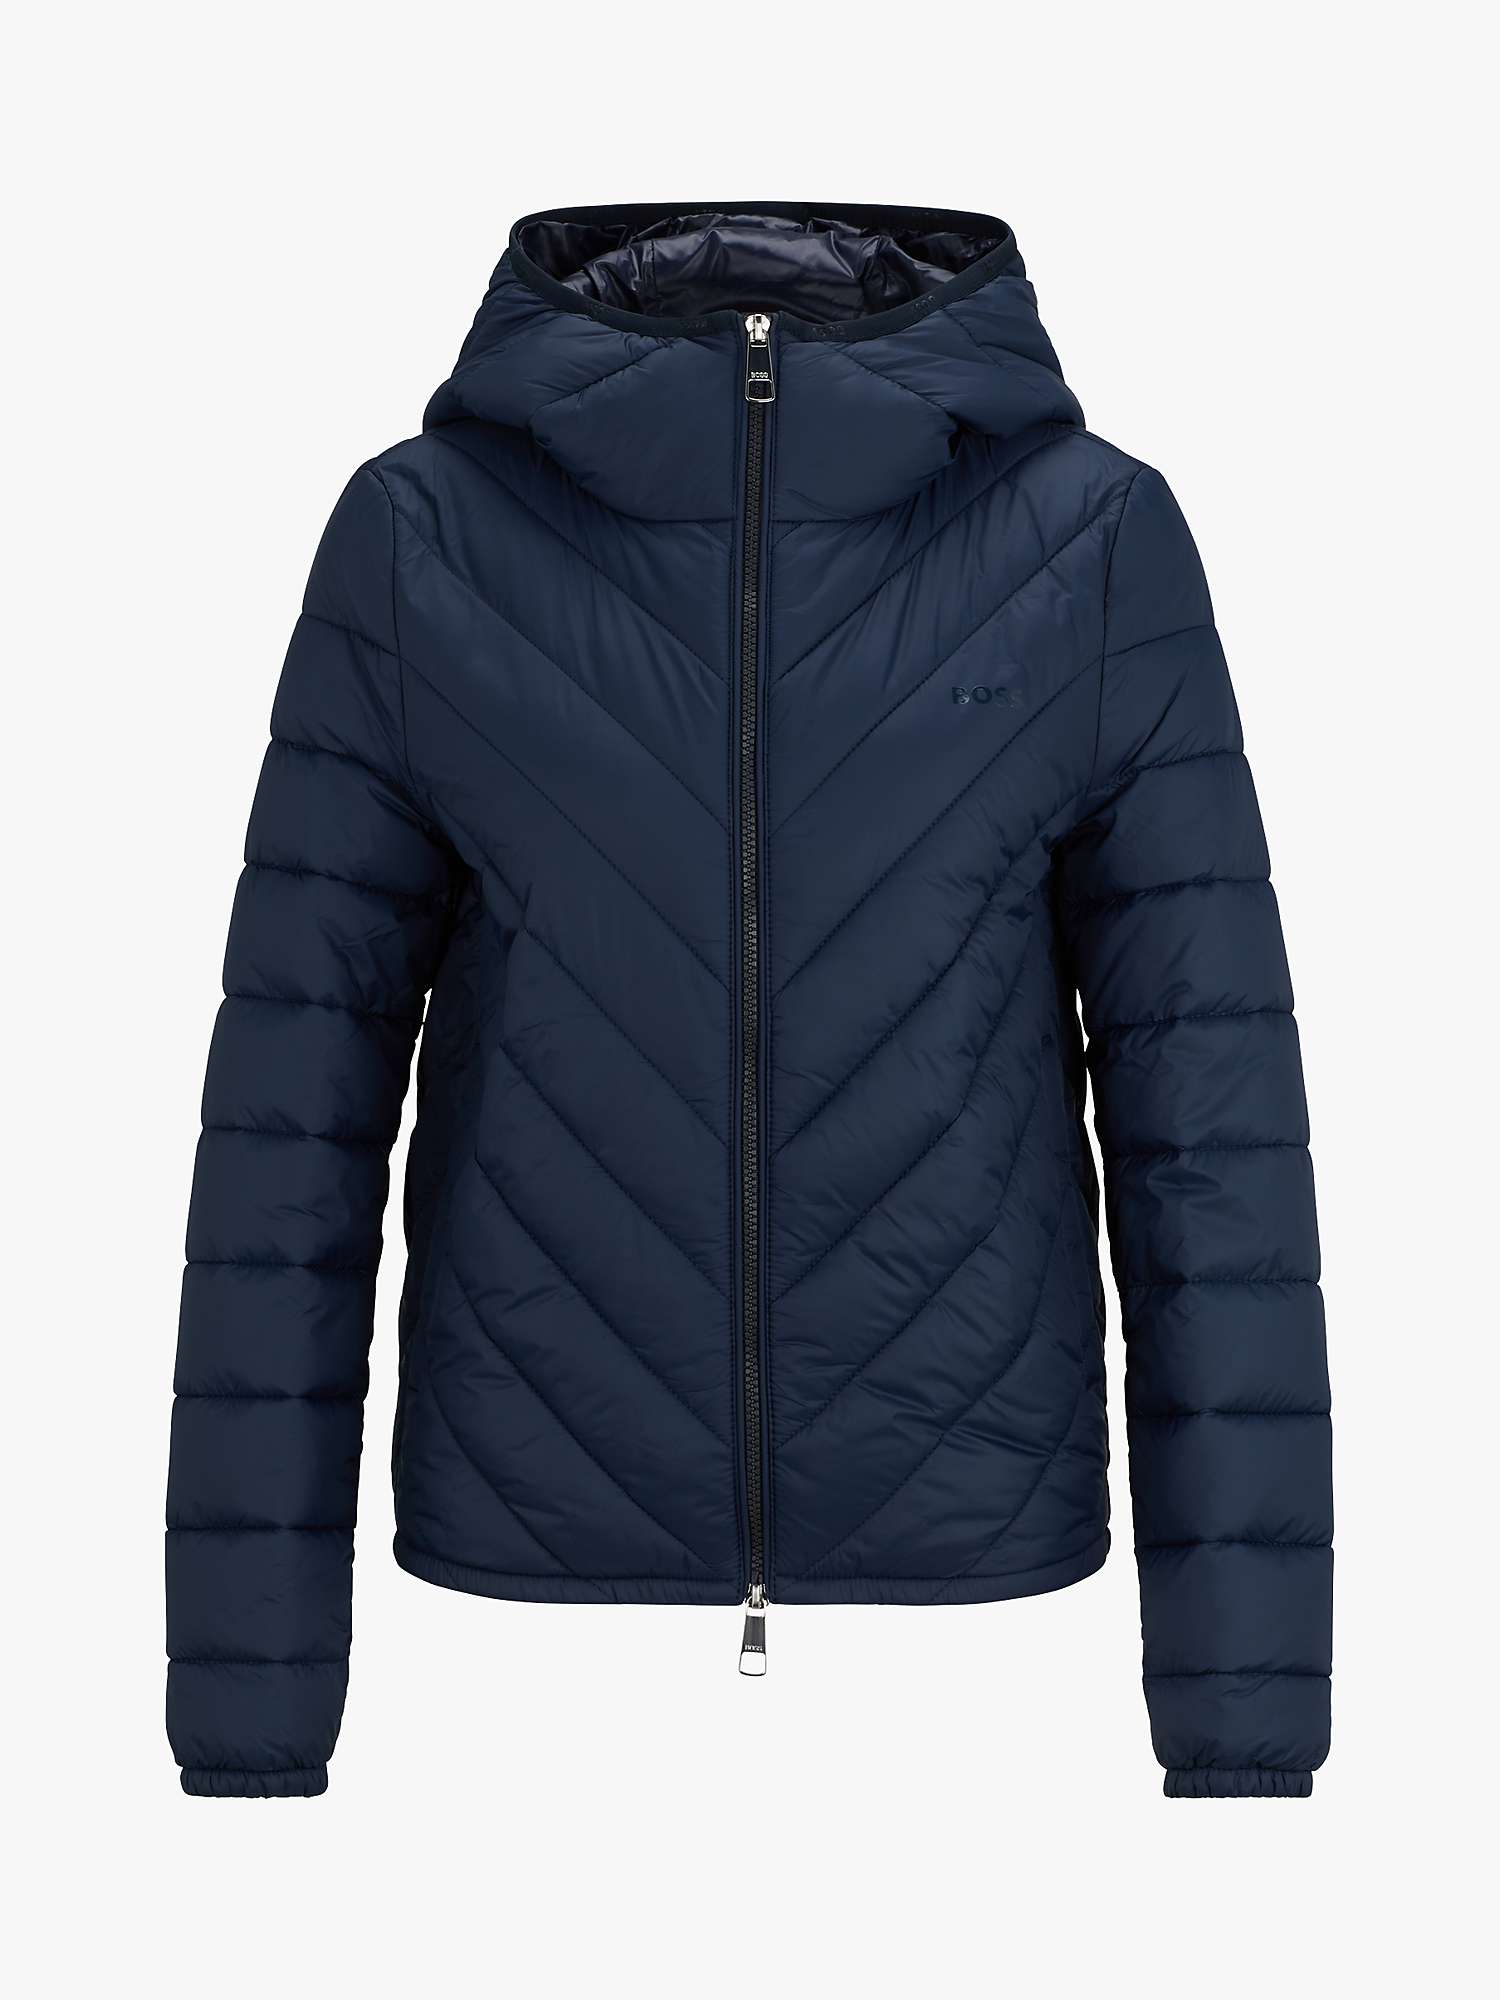 Buy BOSS Palatto Quilted Short Jacket, Navy Online at johnlewis.com